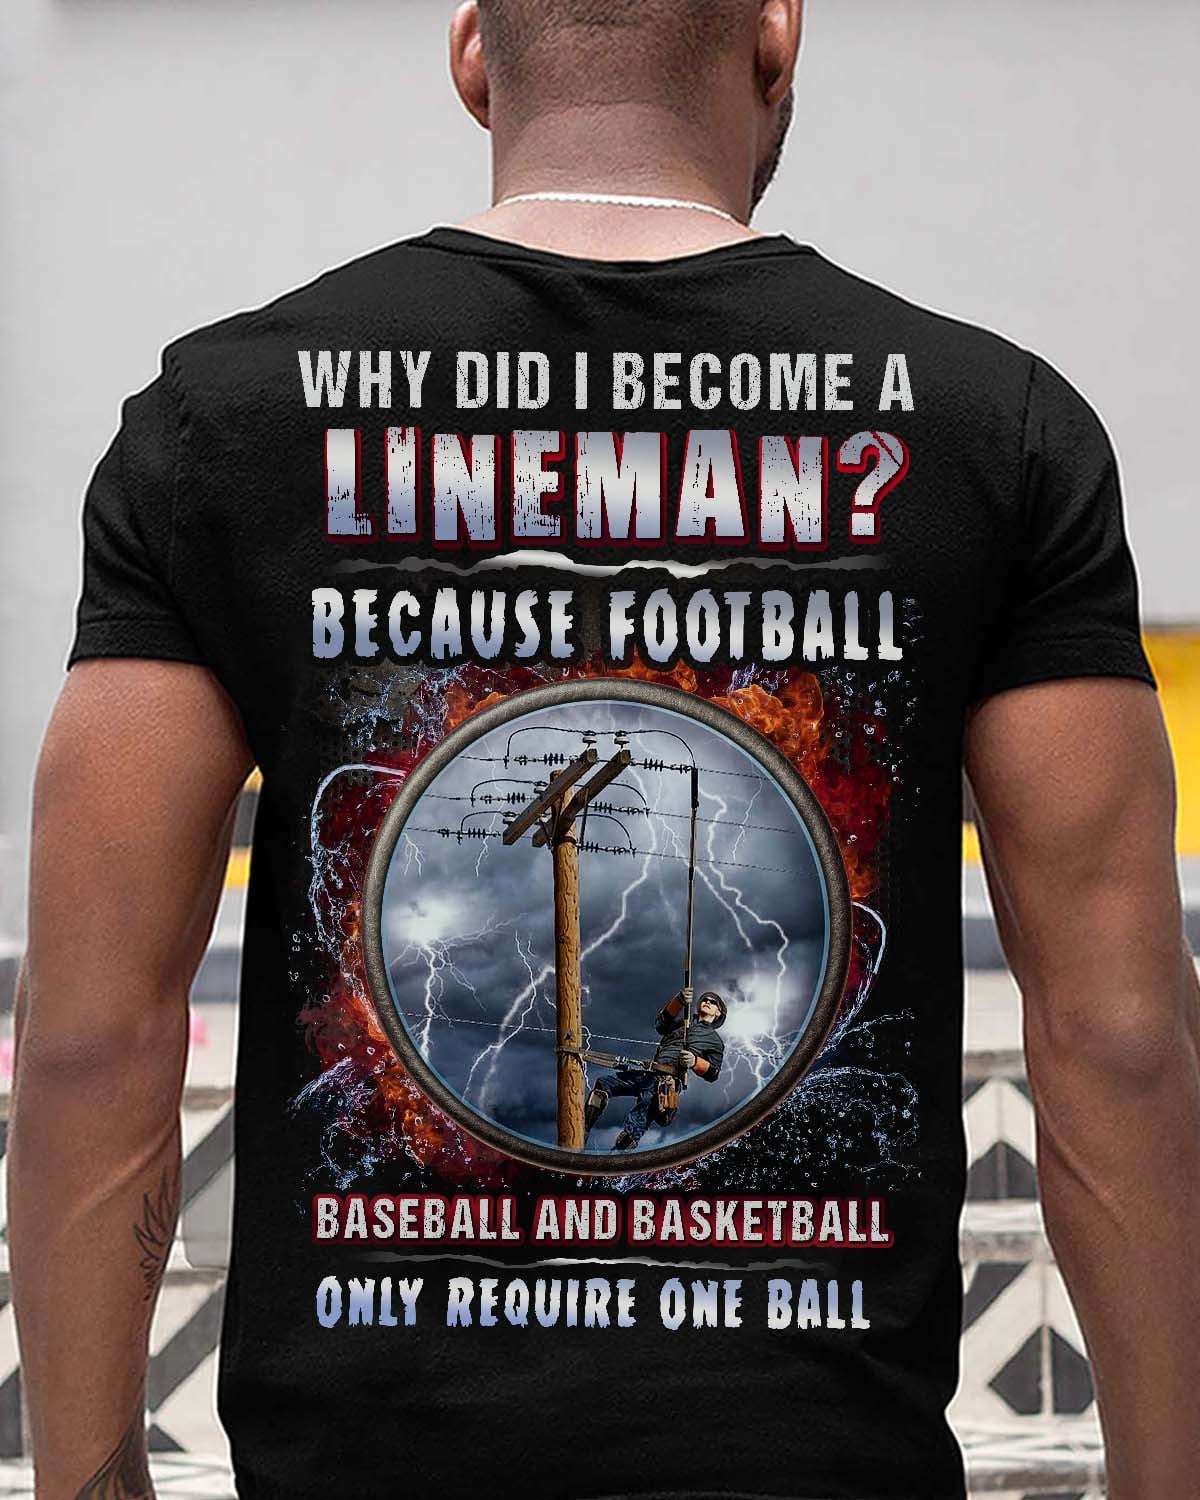 Why did i become a lineman? Because football baseball and basketball only require one ball